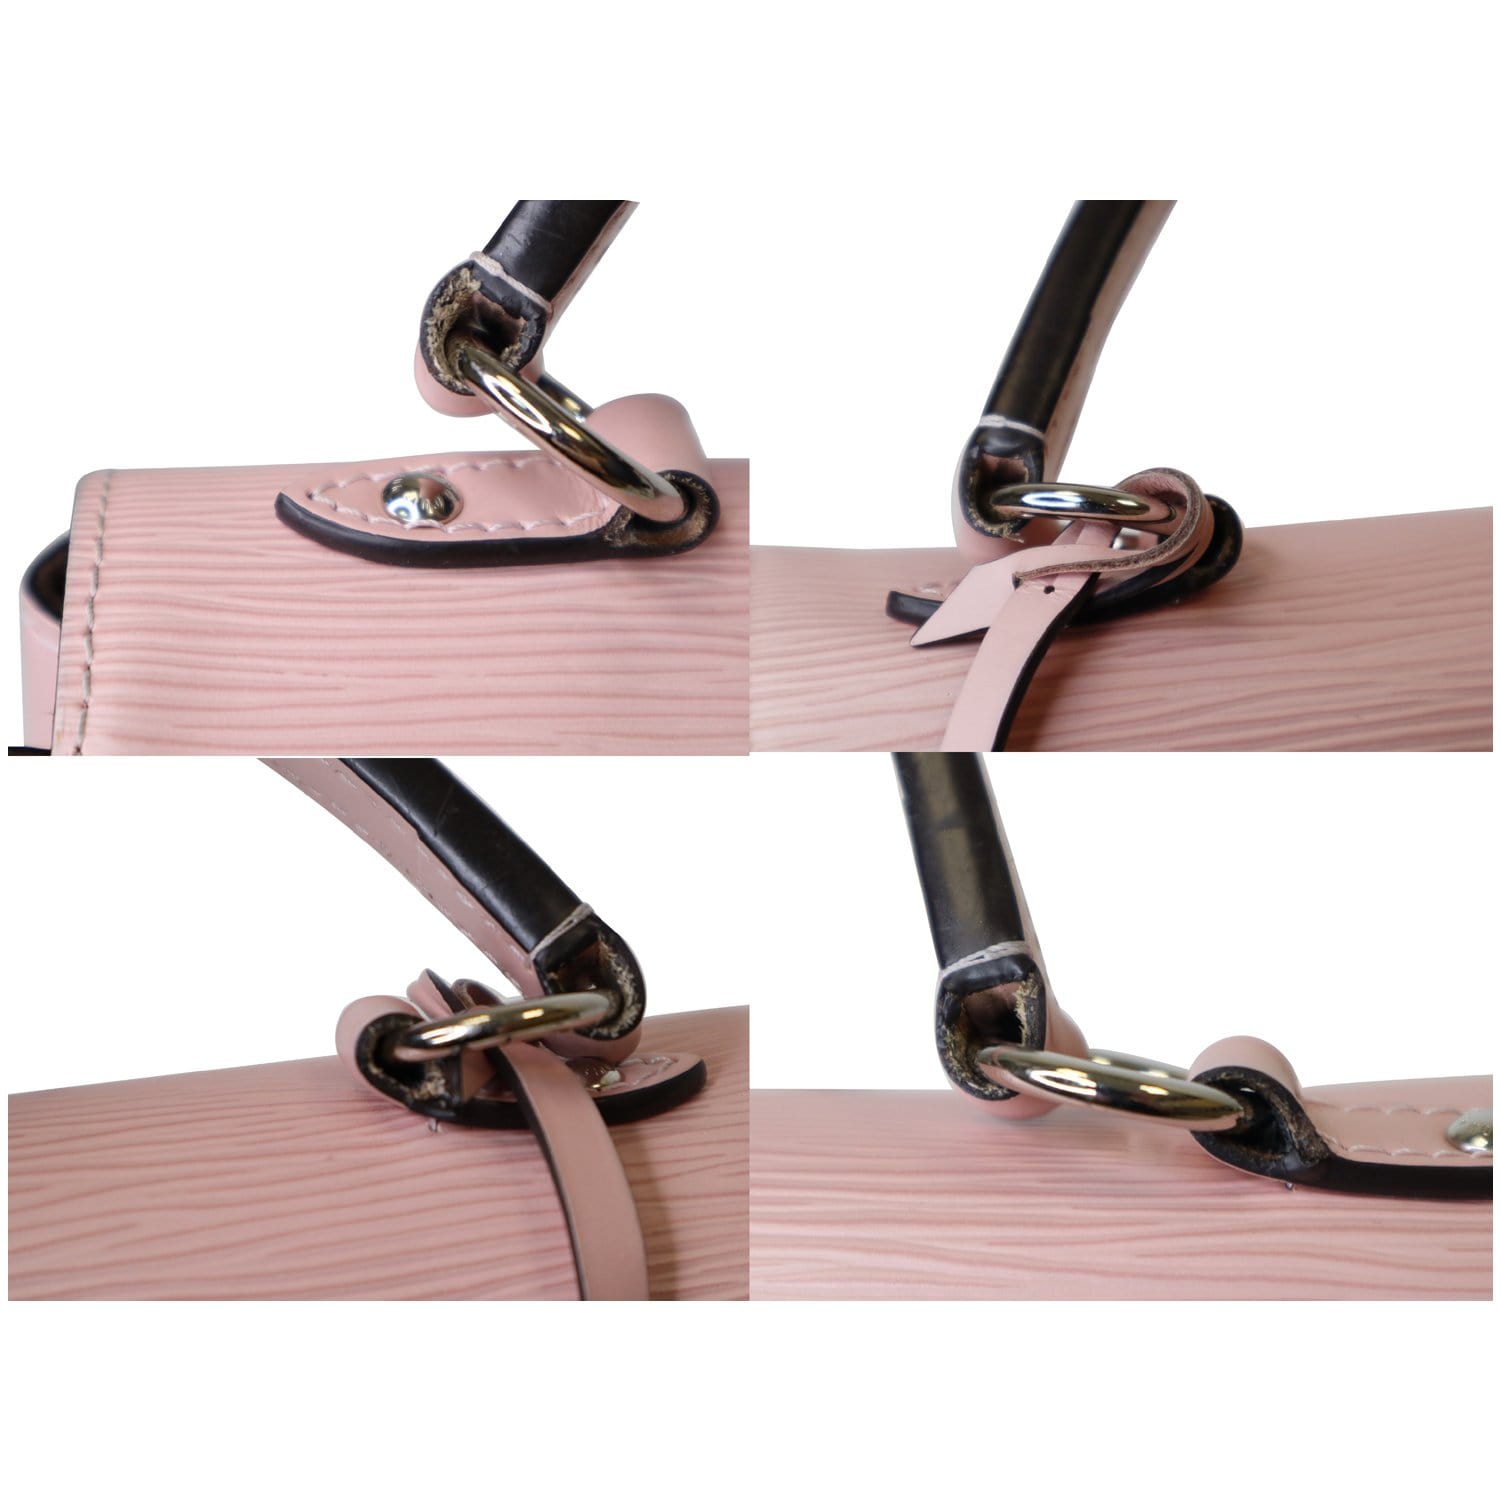 Pale pink Cluny BB bag in Epi leather Louis Vuitton Numbered